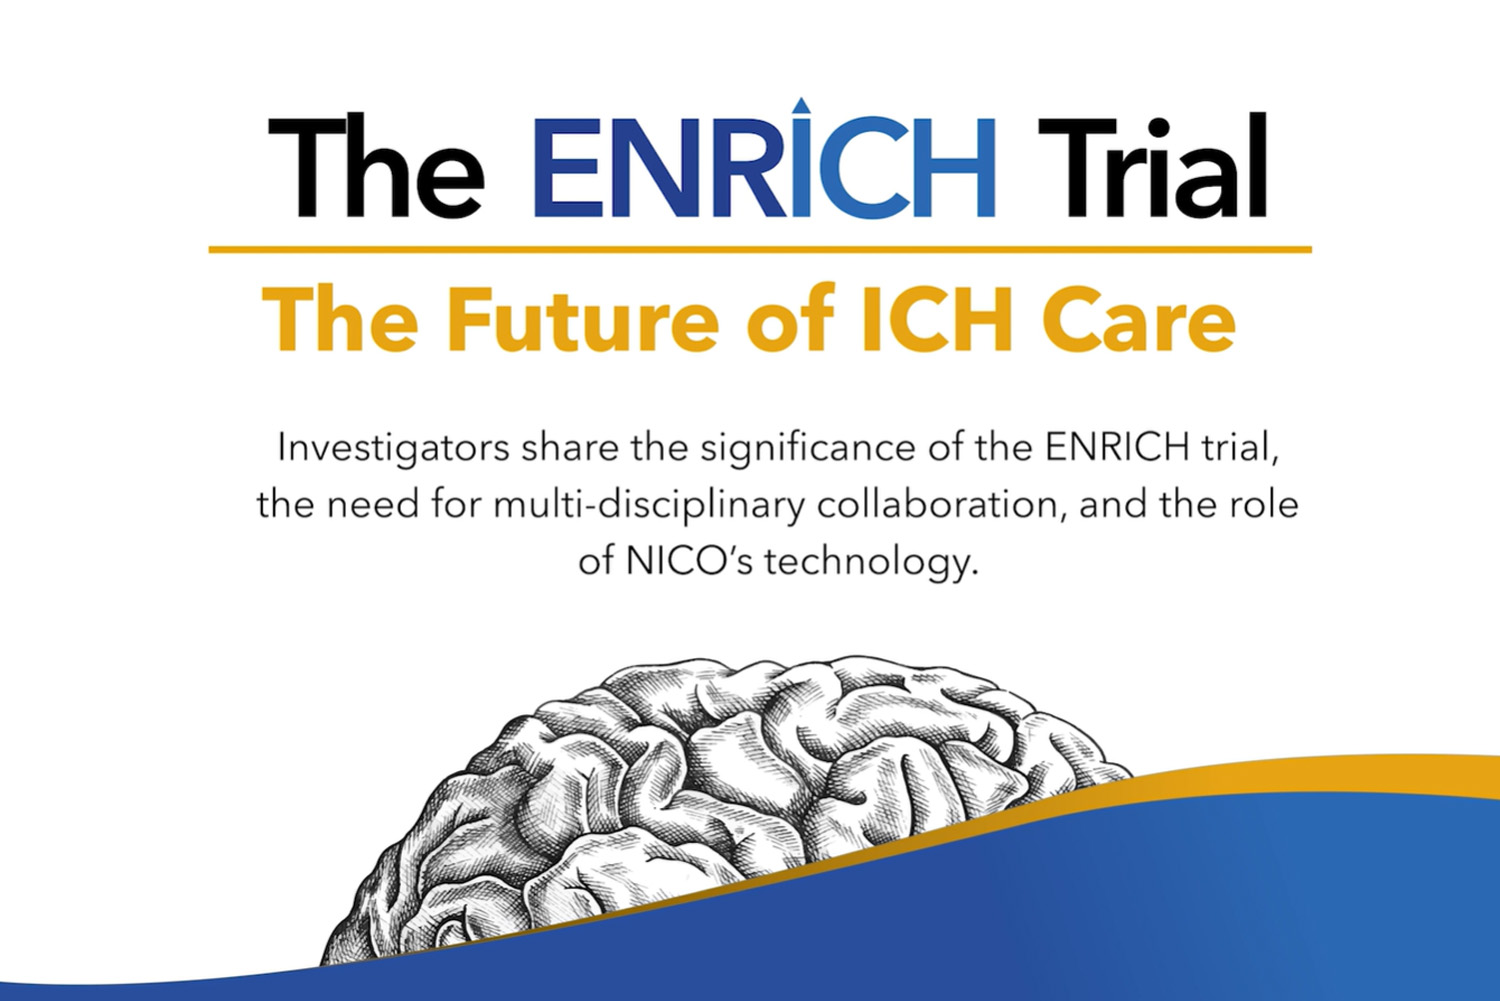 The New England Journal of Medicine Publishes Complete Data from ENRICH, the First Positive Trial to Improve Functional and Economic Outcomes for Intracerebral Hemorrhage (ICH)